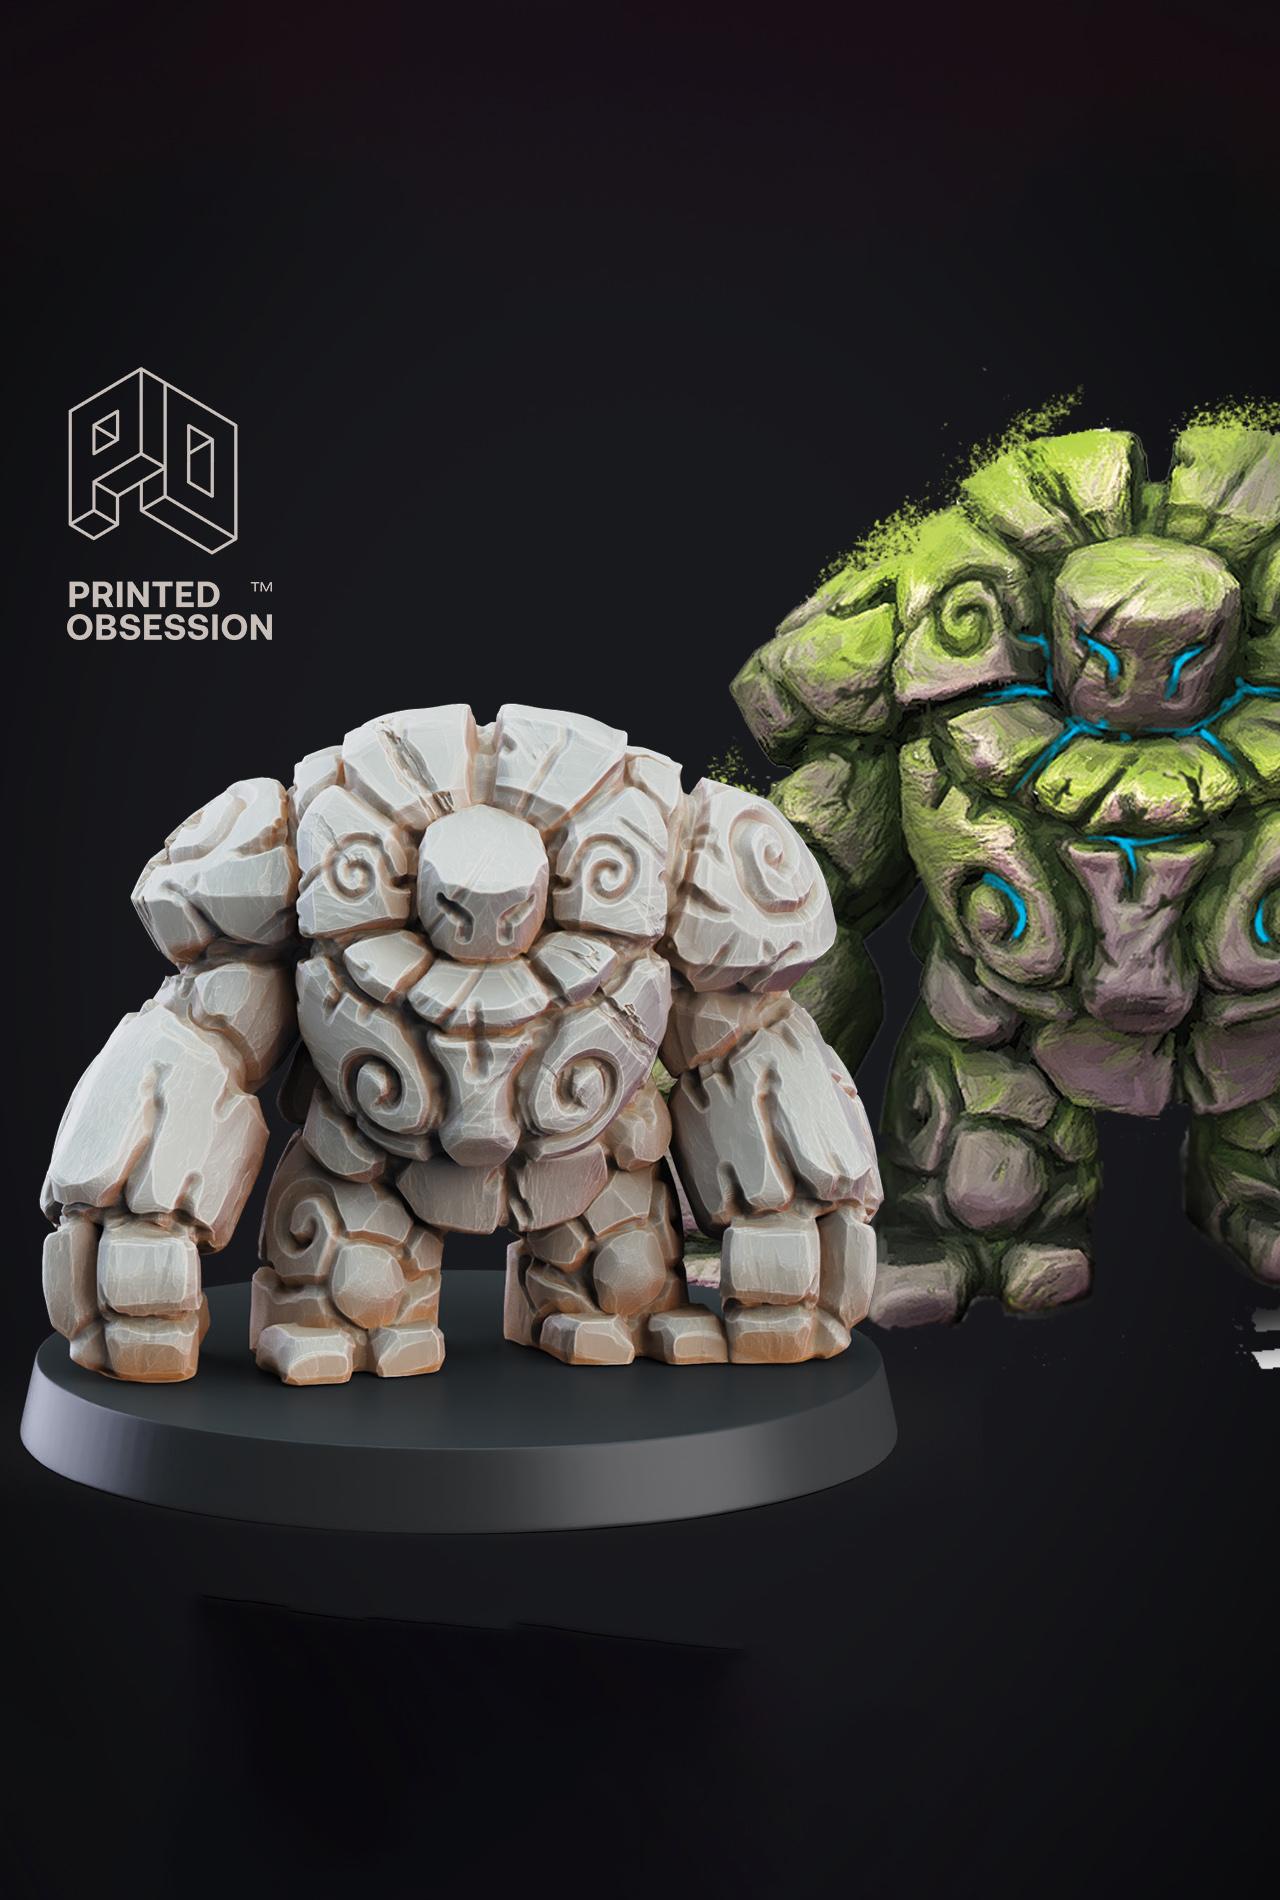 Stone Golem - Constructs - PRESUPPORTED - Illustrated and Stats - 32mm scale			 3d model